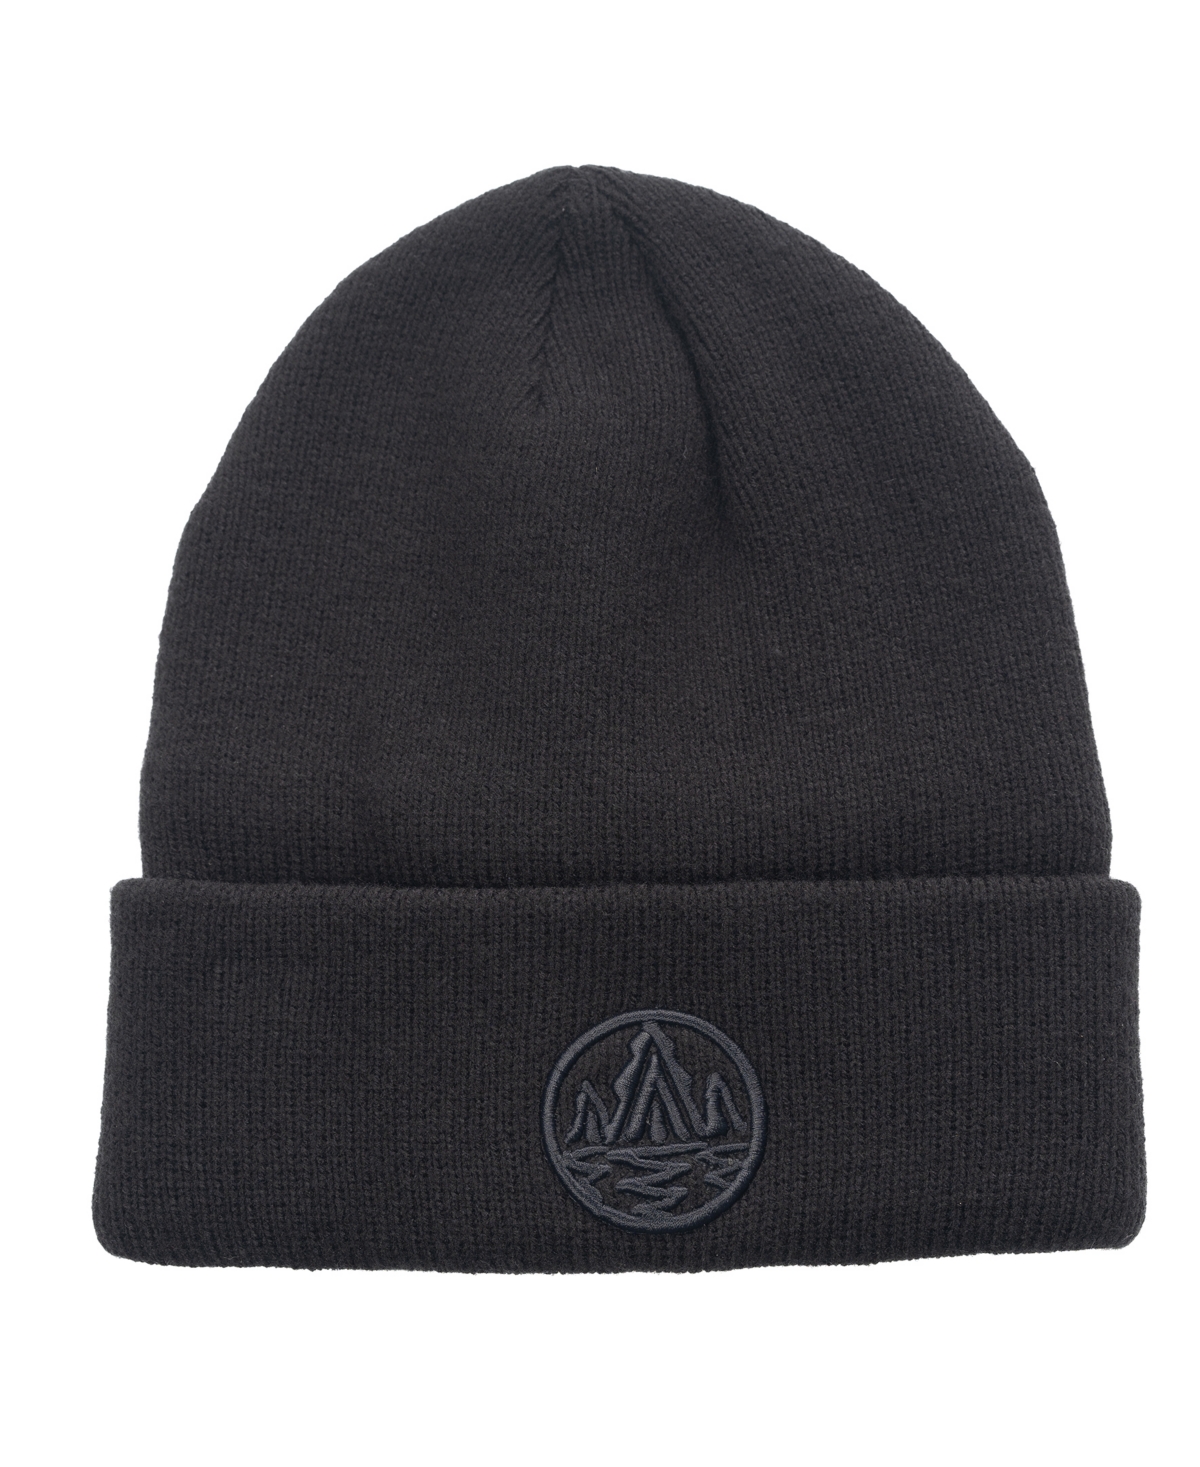 Men's Knit Hat with Round Tree Embroidery Logo Hat - Black